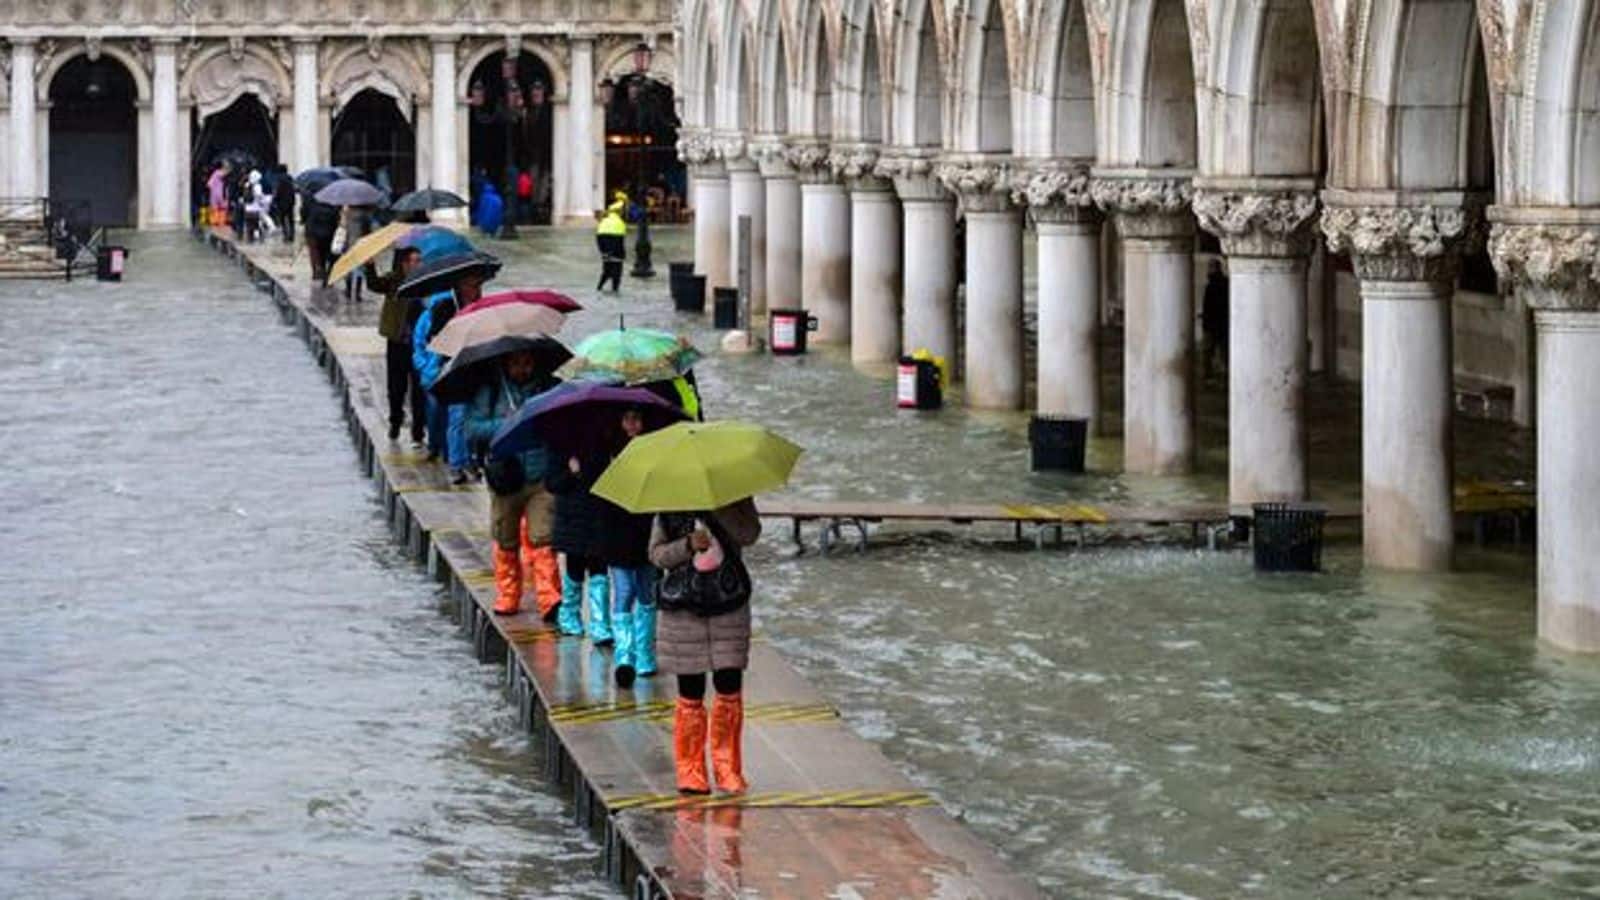 Navigate acqua alta in Venice with these tips